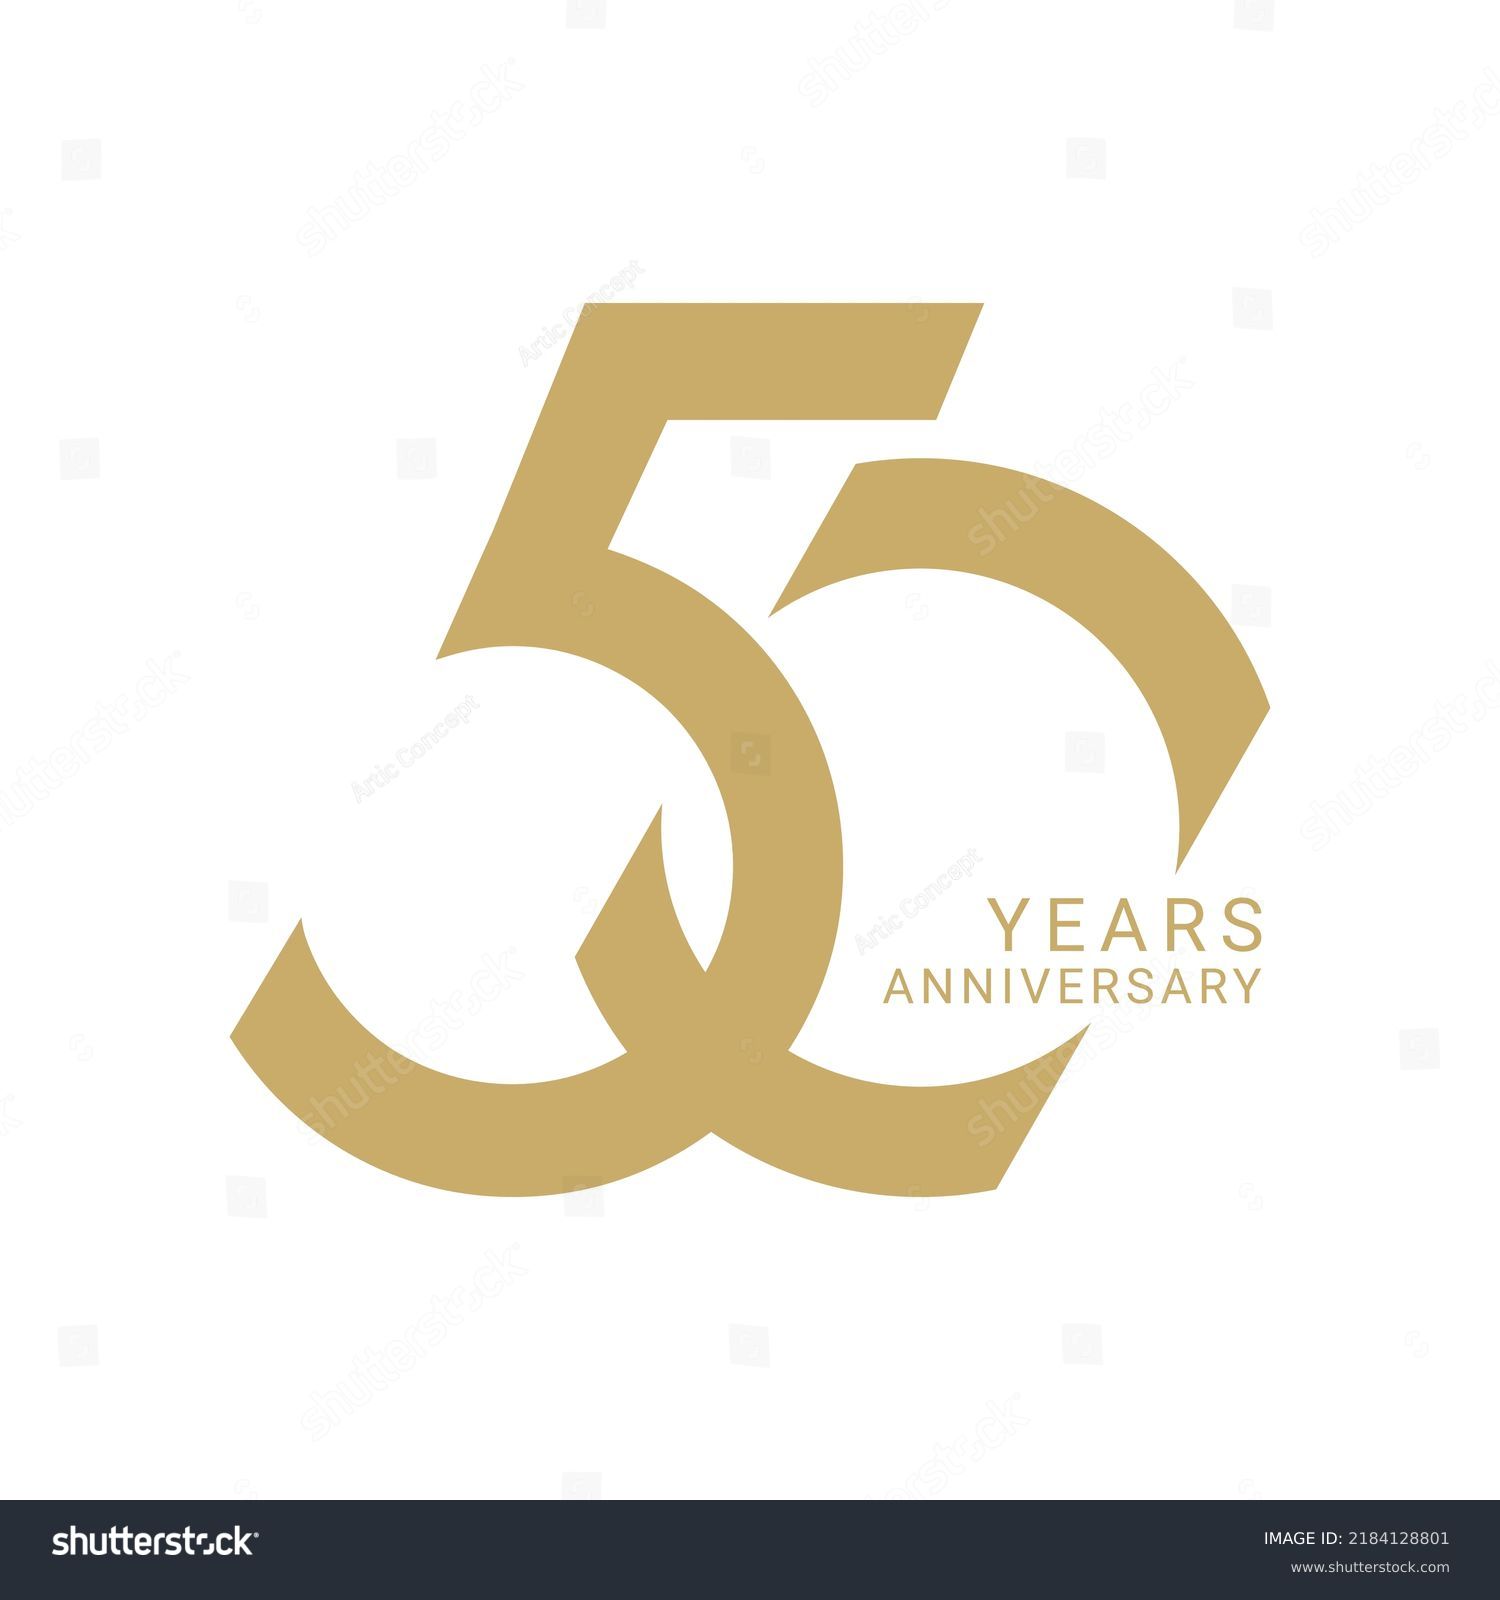 SVG of 50th 50 Years Anniversary Logo, Golden Color, Vector Template Design element for birthday, invitation, wedding, jubilee and greeting card illustration. svg